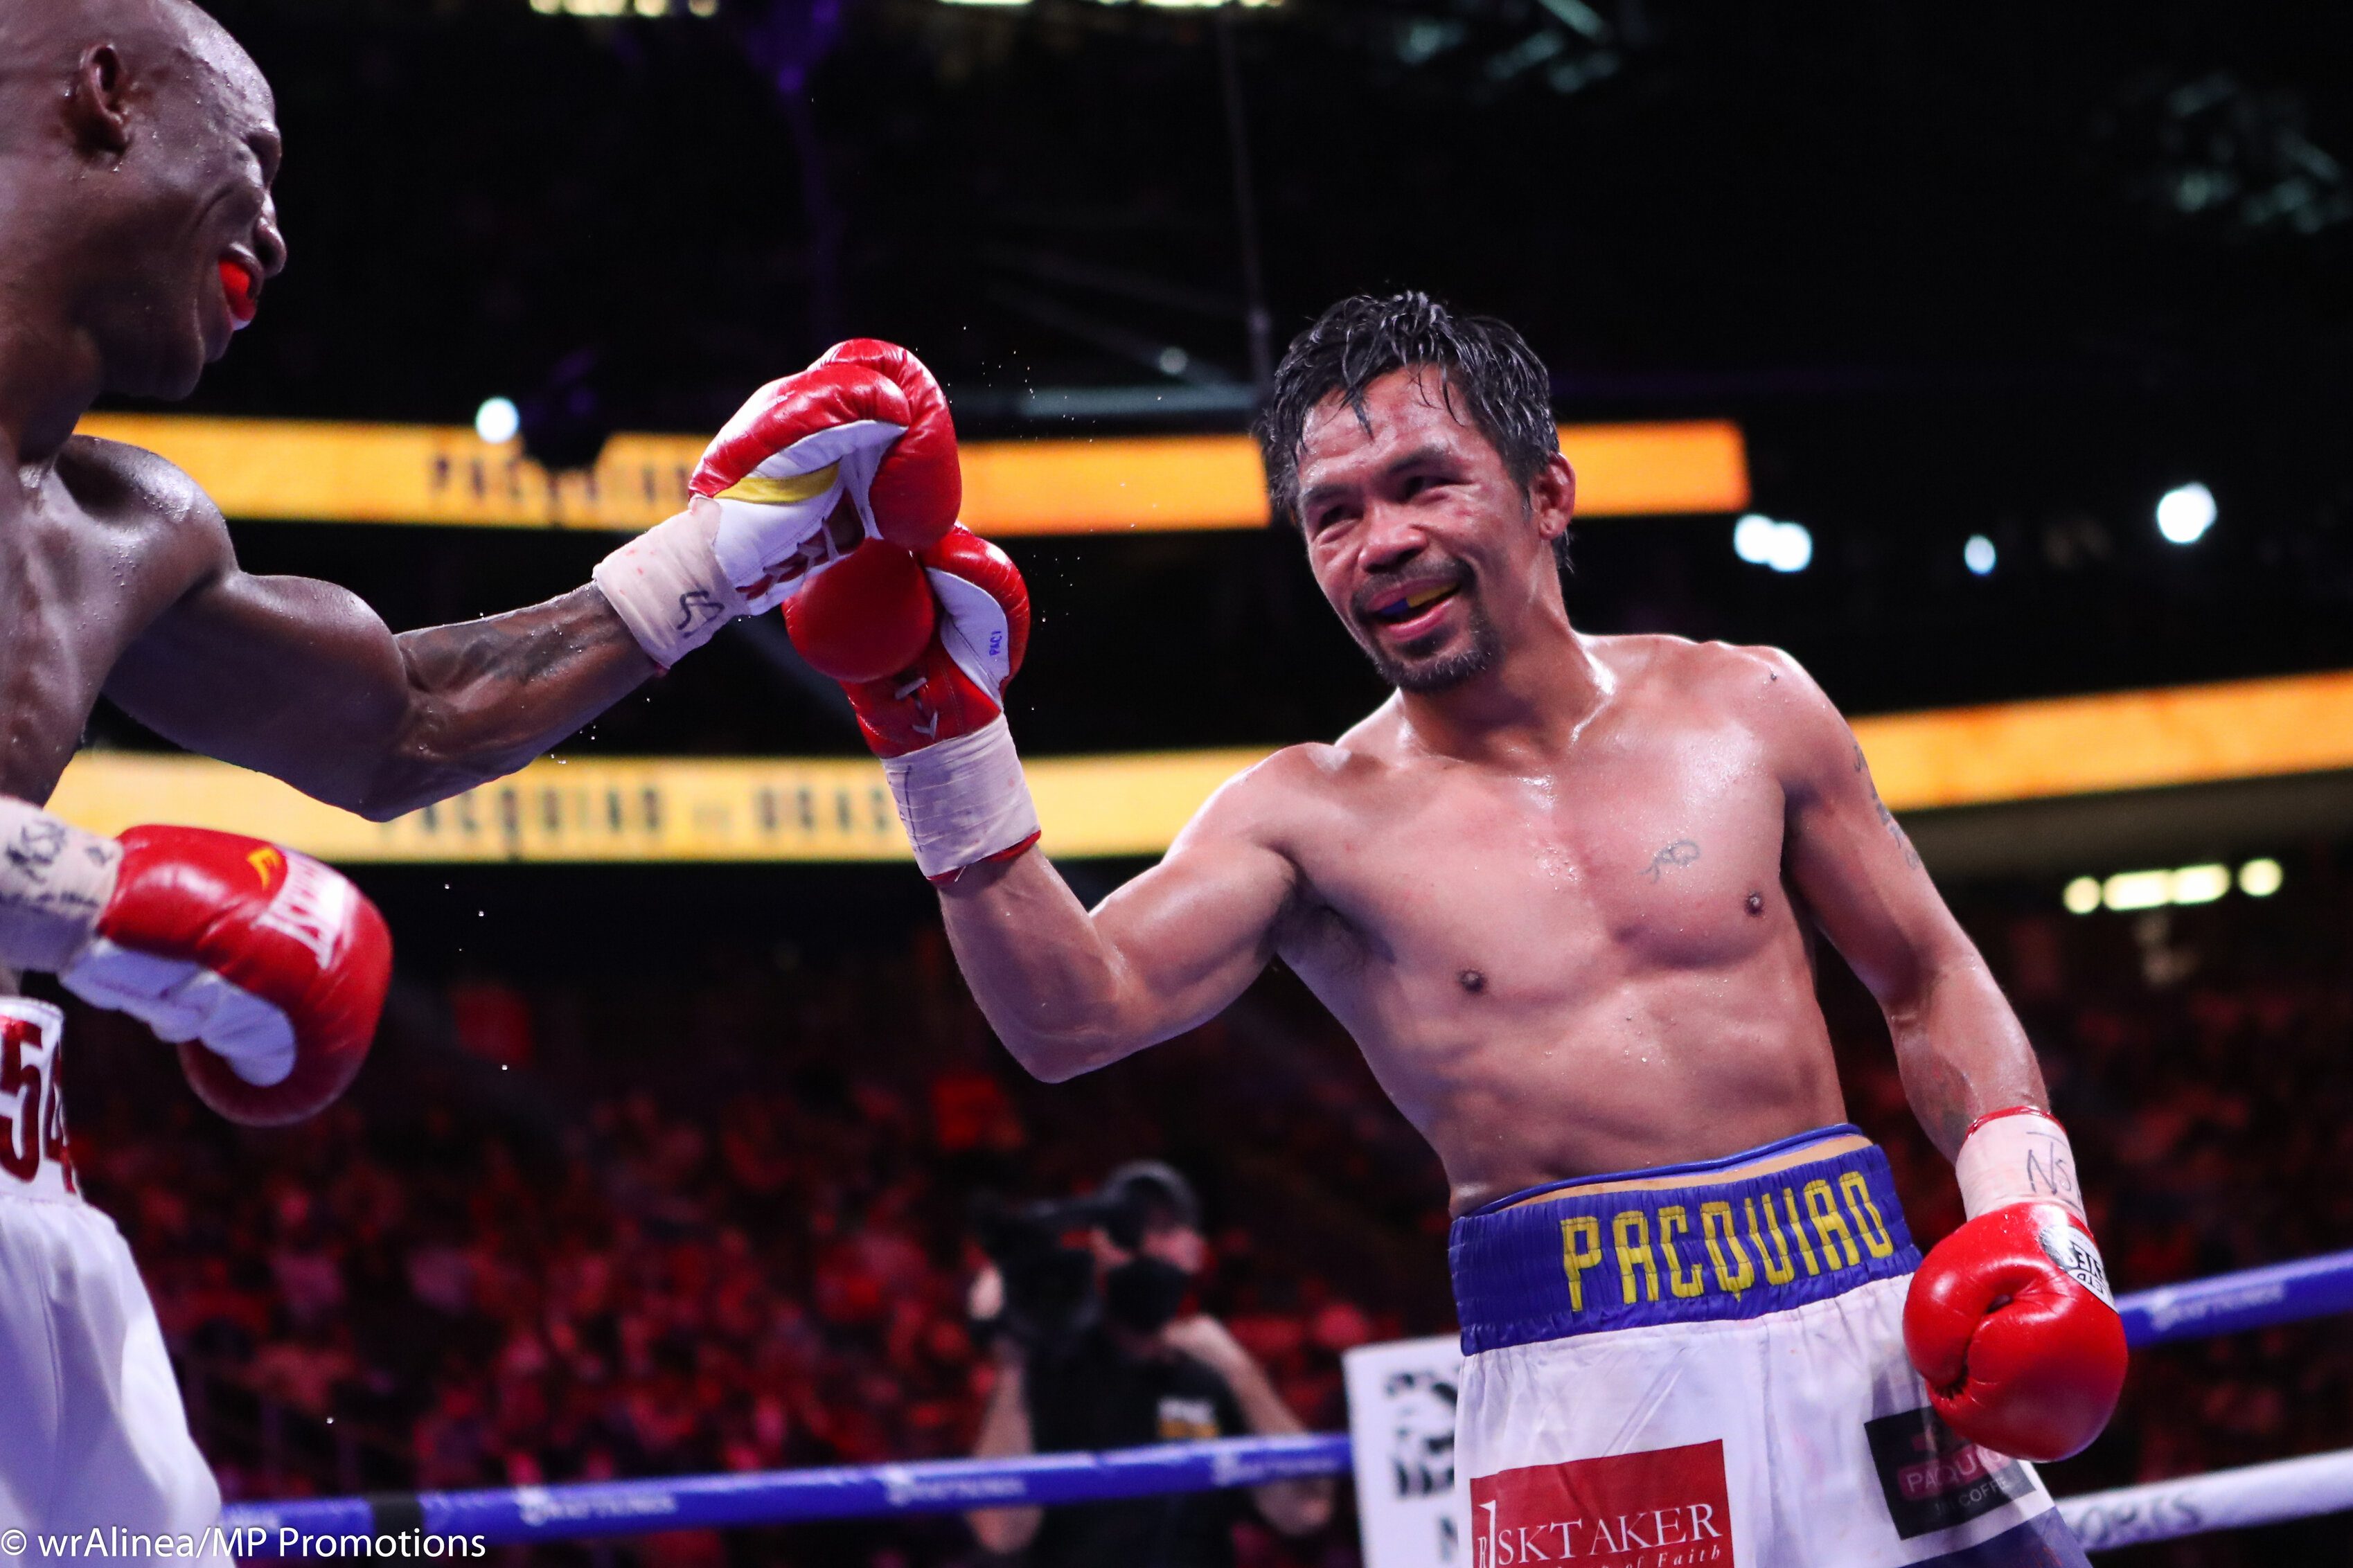 Pacman out: Pacquiao hangs up gloves on legendary boxing career